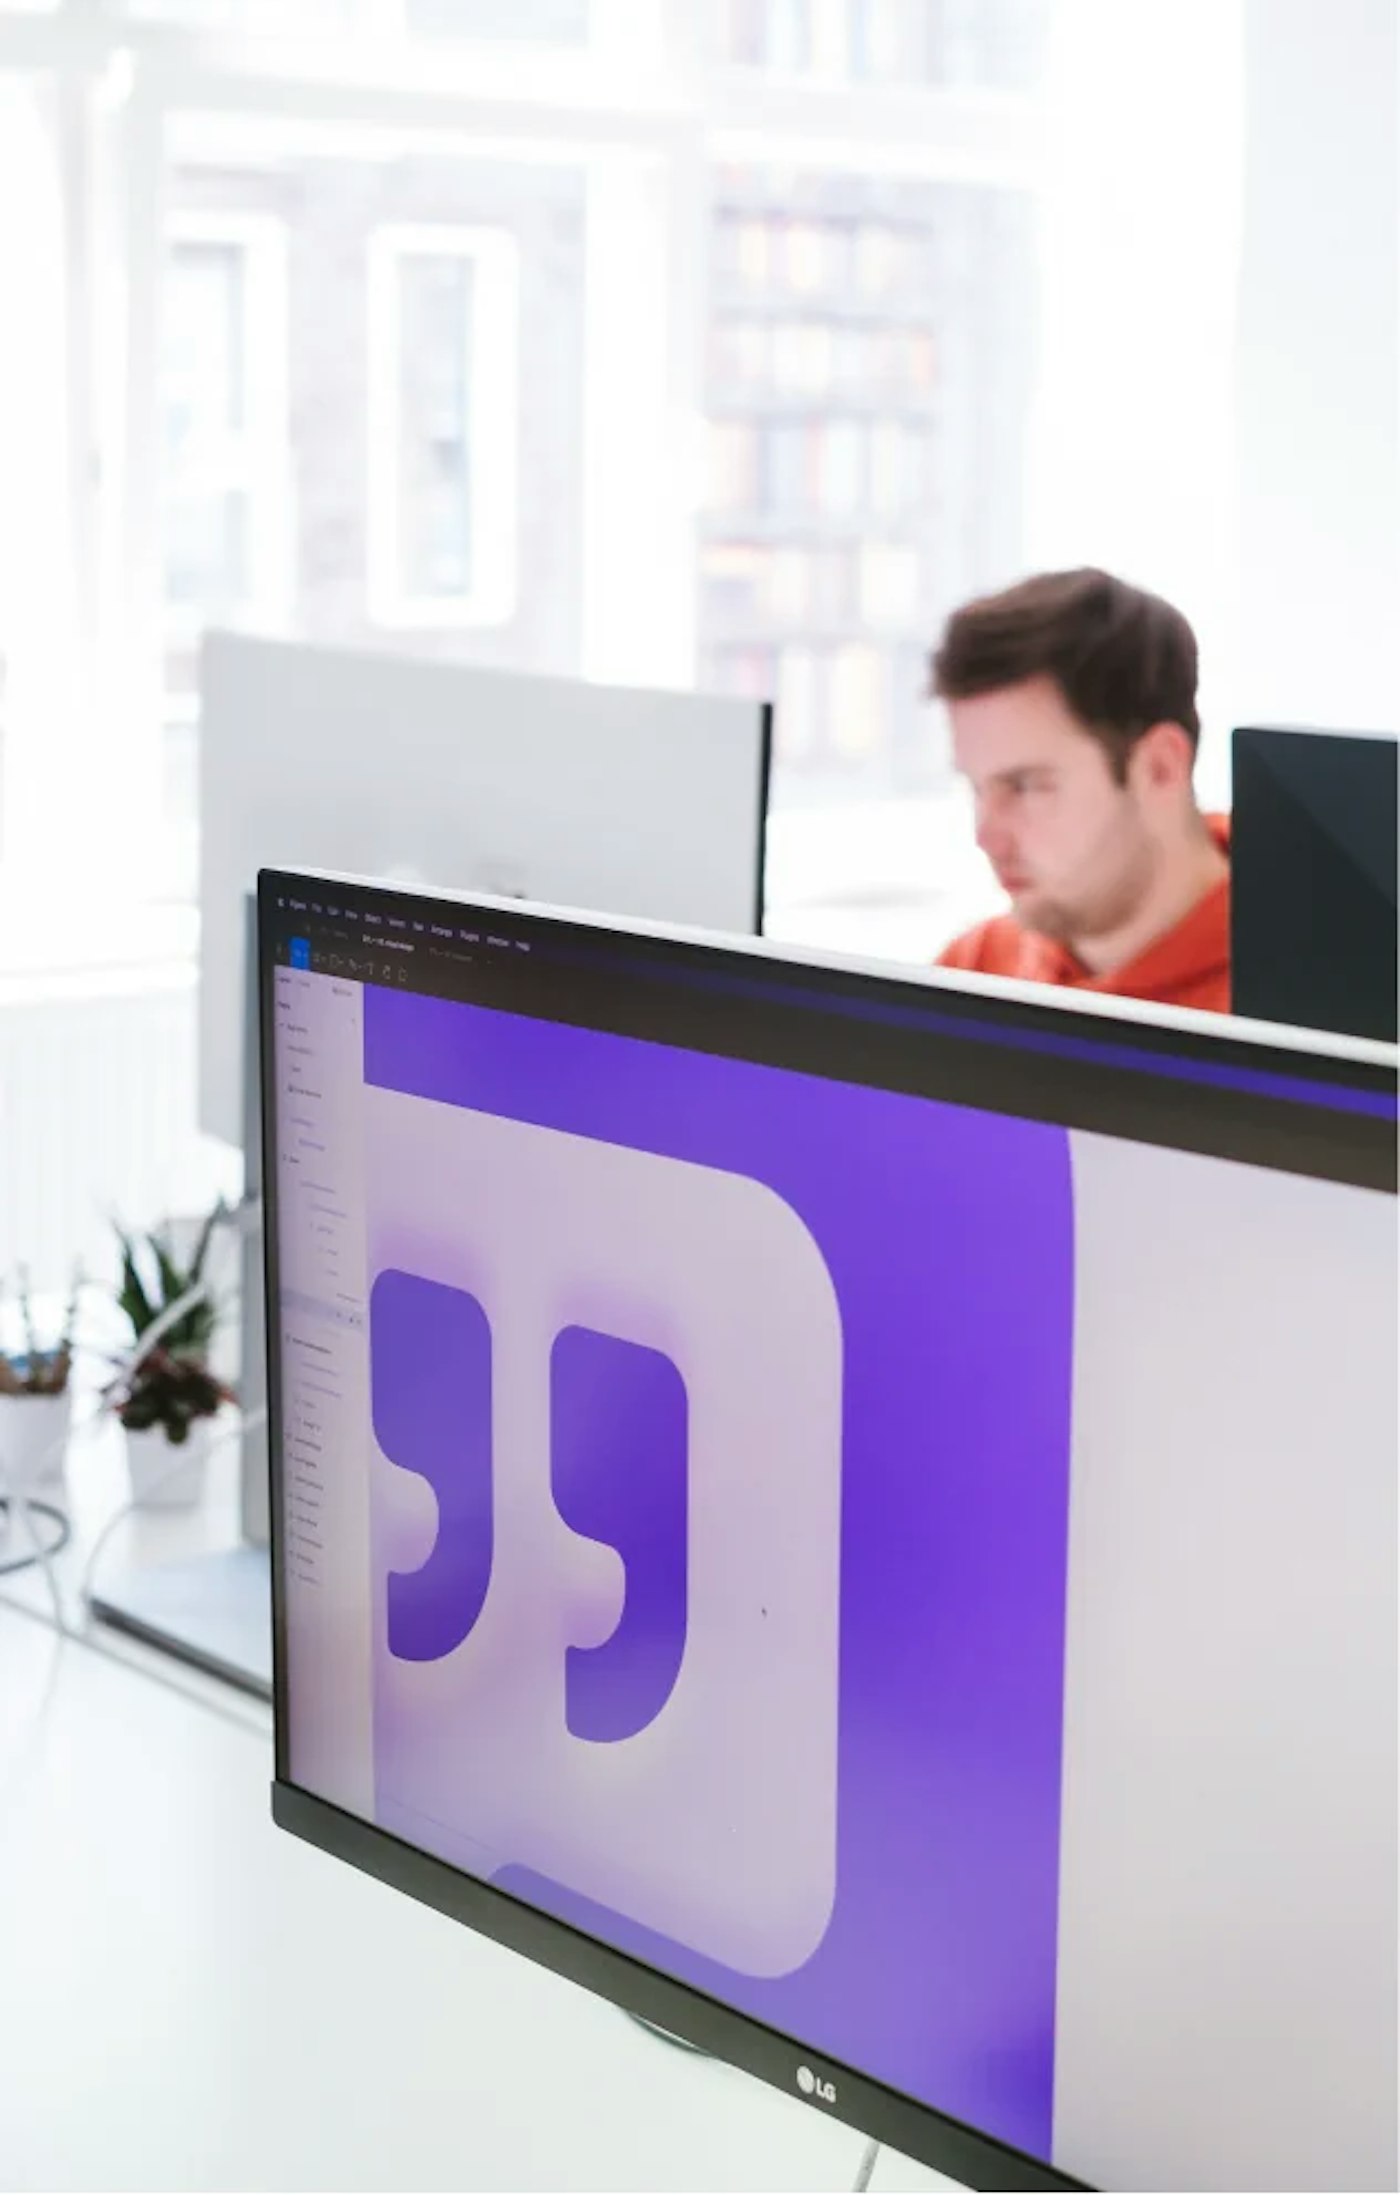 Monitor showing a larger purple themes icon design. In the rear is a person working behind their computer.